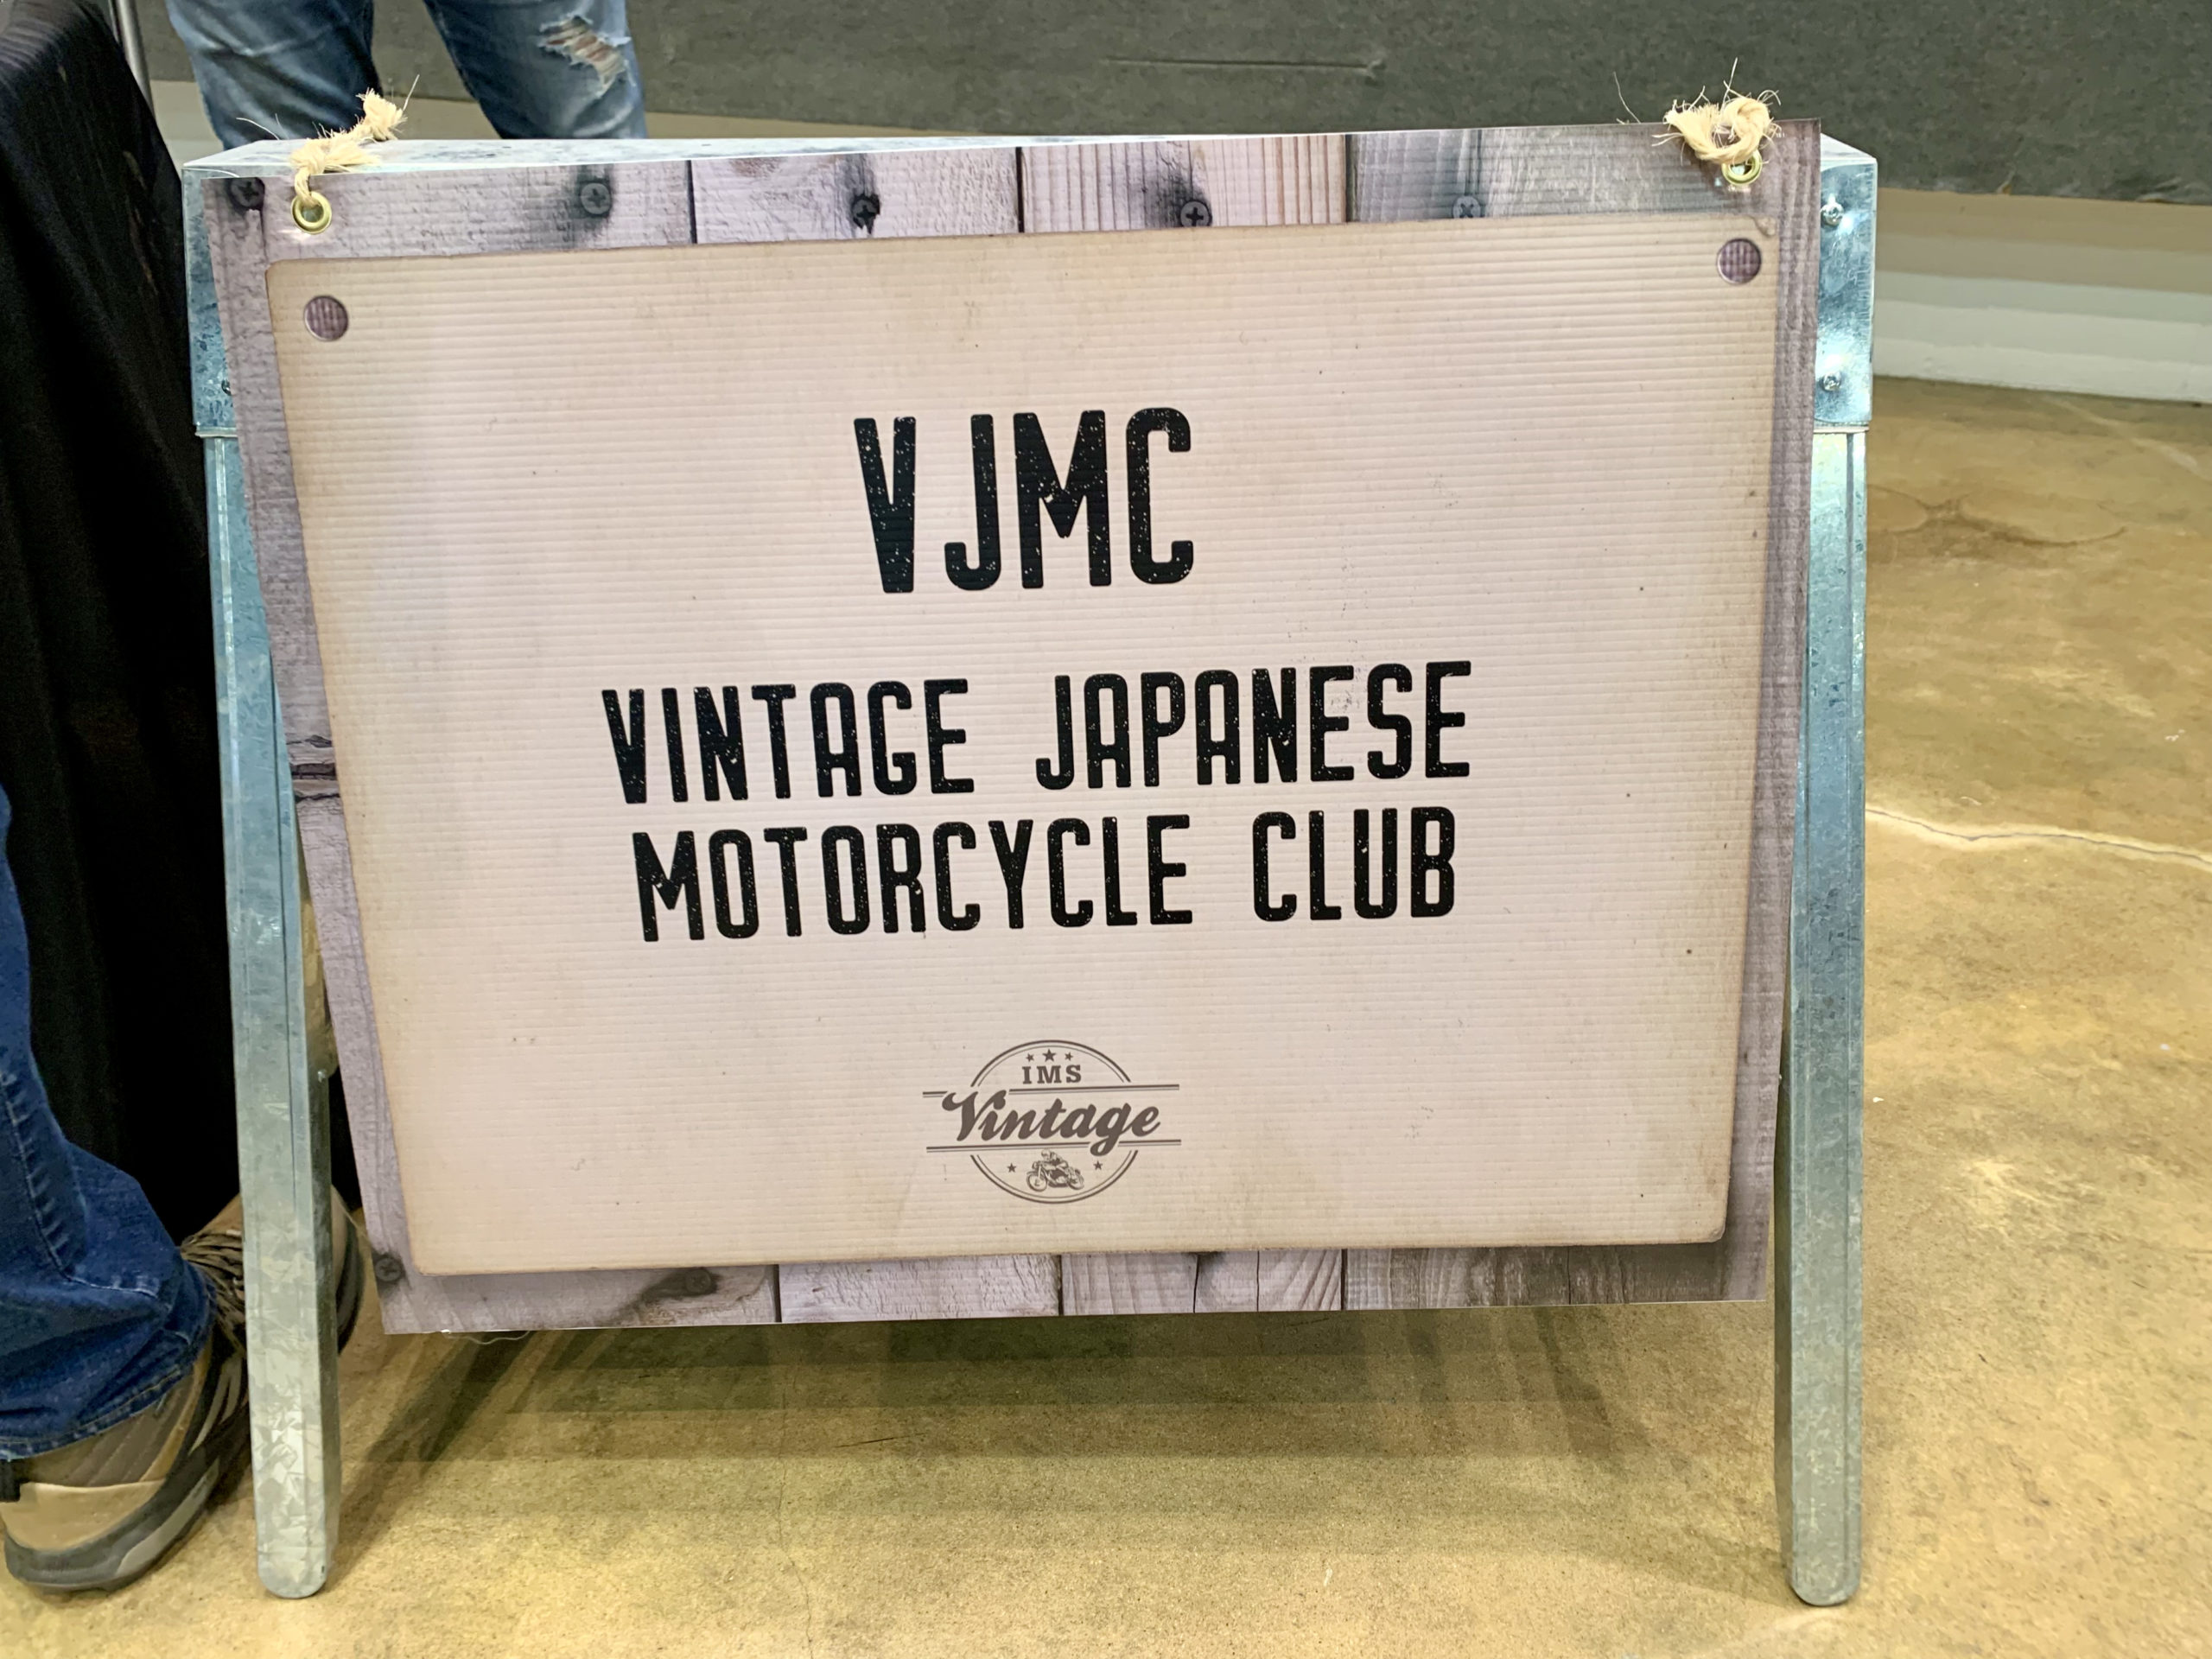 Vintage Japanese Motorcycle Club sign at IMS Outdoors 2021